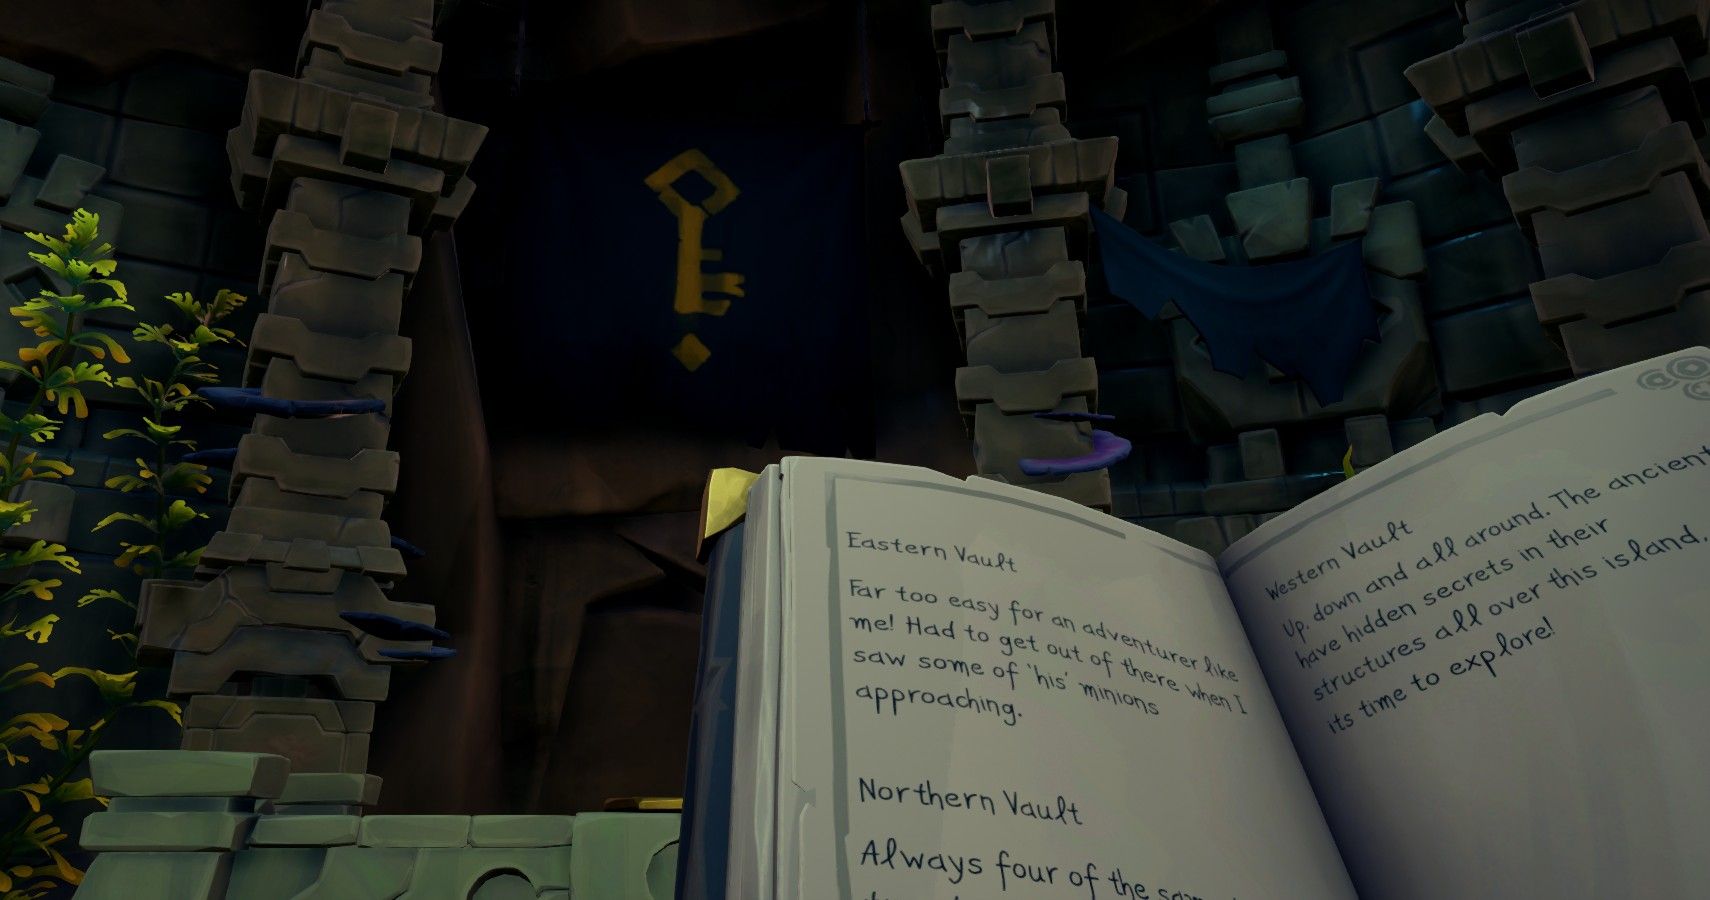 The Eastern Vault in Sea of Thieves